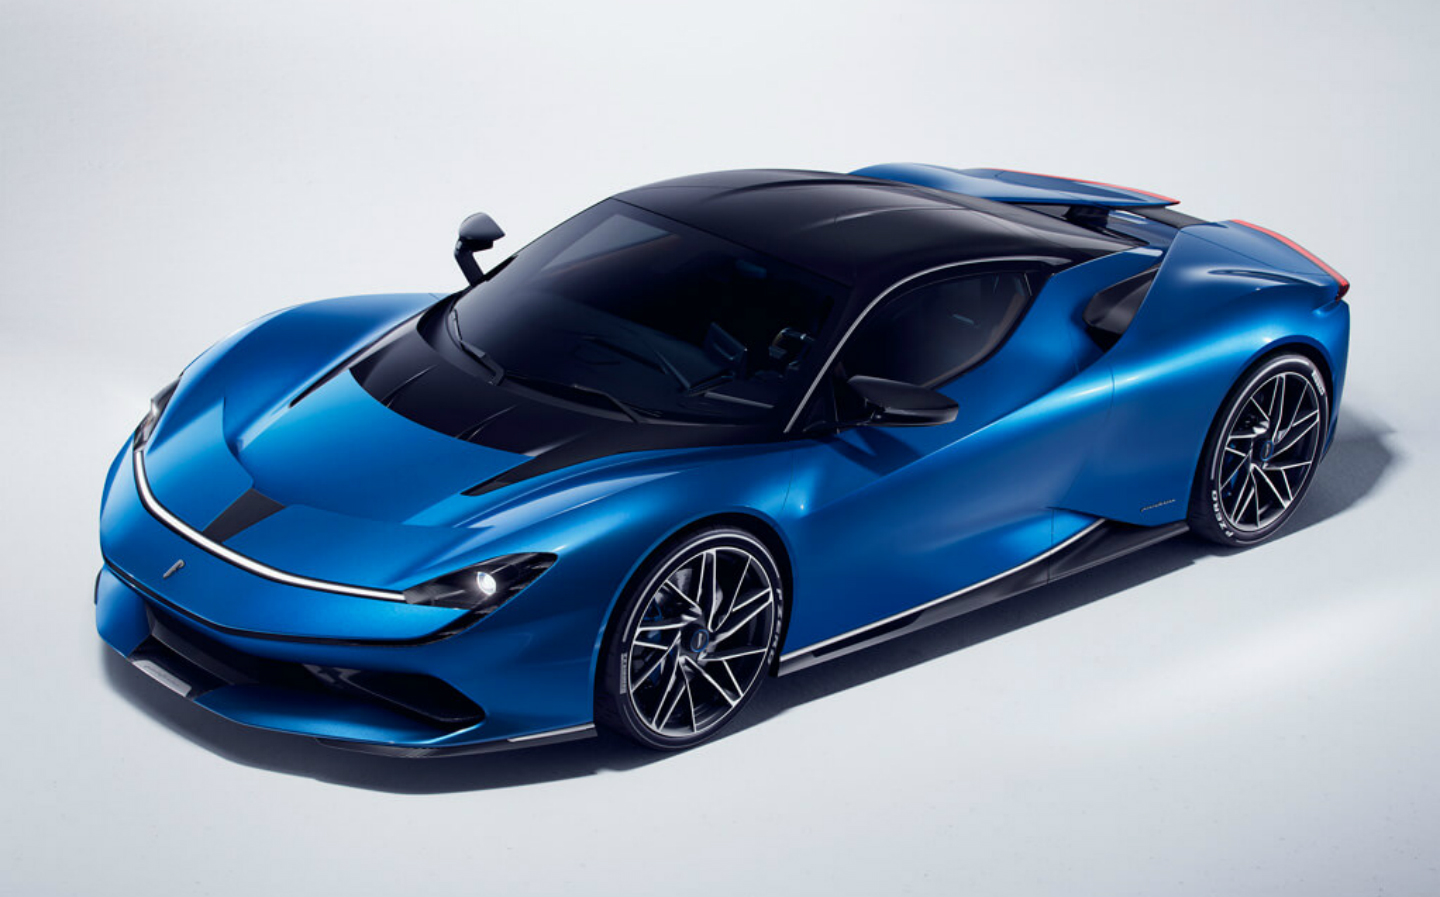 After 80+ years of designing and building bodywork for other auto makers, Pininfarina's decided to have a go at building its own road car. The company isn't taking baby steps with its debut vehicle, either: the Battista is a 1,874bhp pure-electric supercar with a 217mph+ top speed and a sub-two-seconds 0-62mph time.